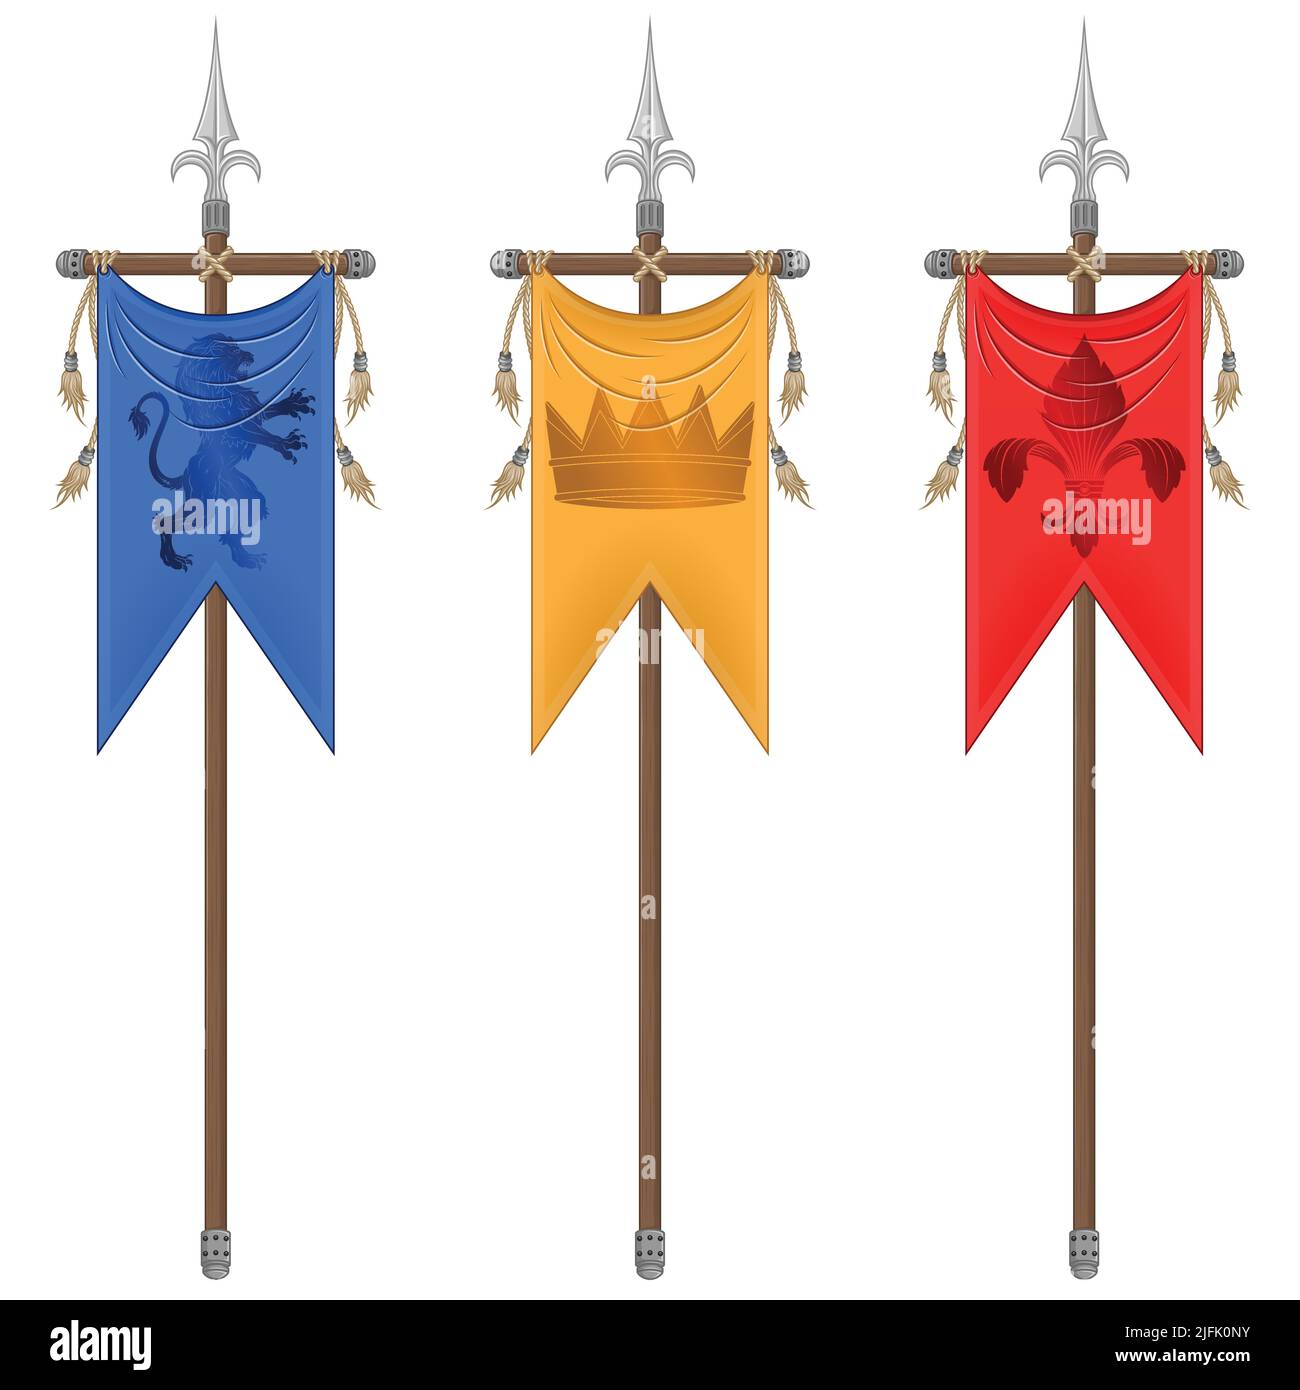 Medieval style vertical flag design with heraldic symbol, flag of noble families of the middle ages on a spear Stock Vector